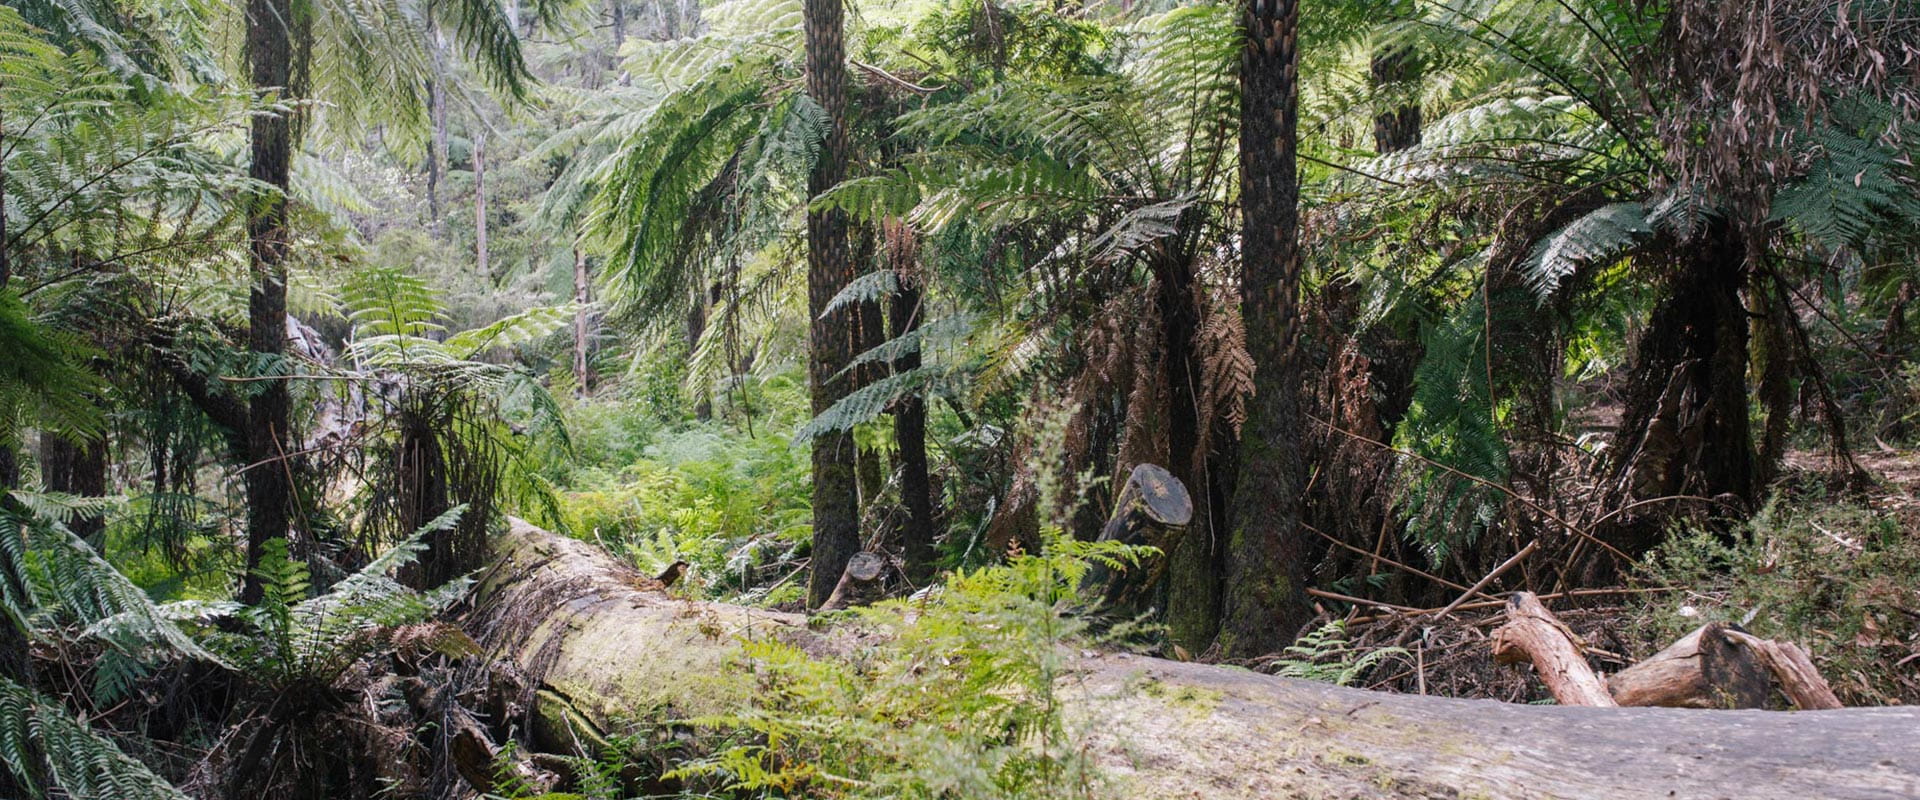 A tall forest with towering tree ferns and a large moss covered log.